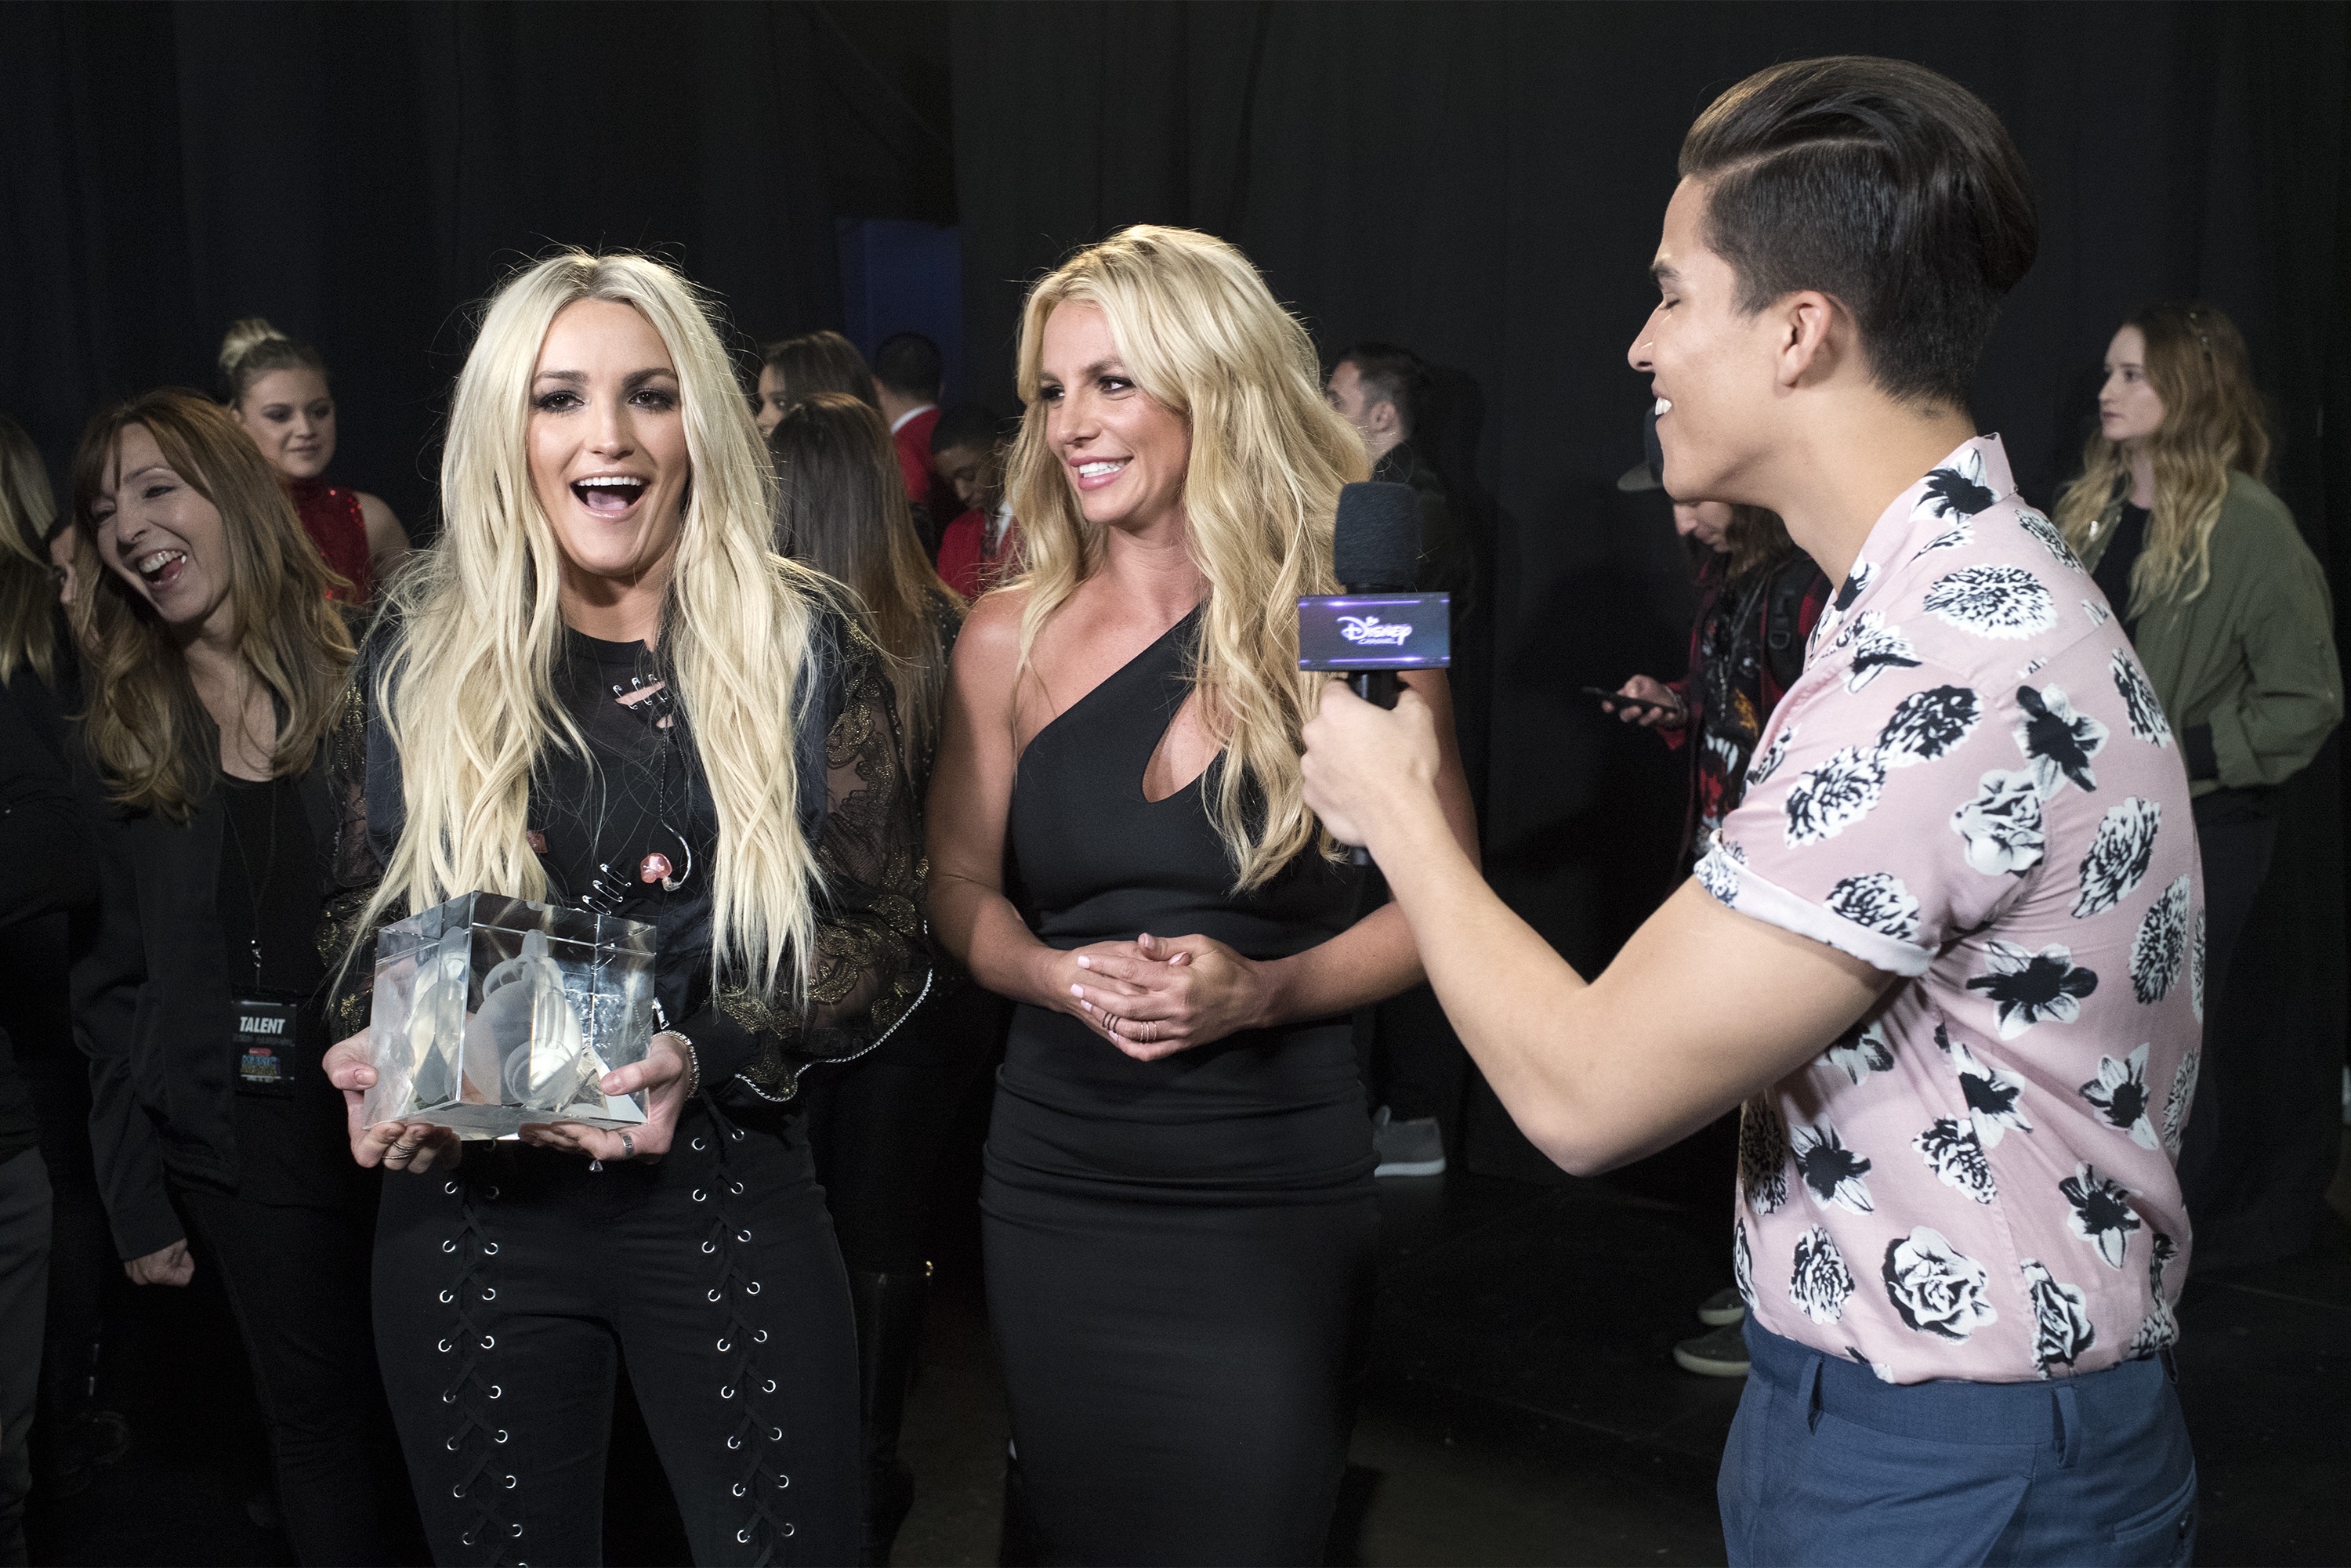 Jamie Lynn Spears and Britney Spears at the 2017 Radio Disney Music Awards